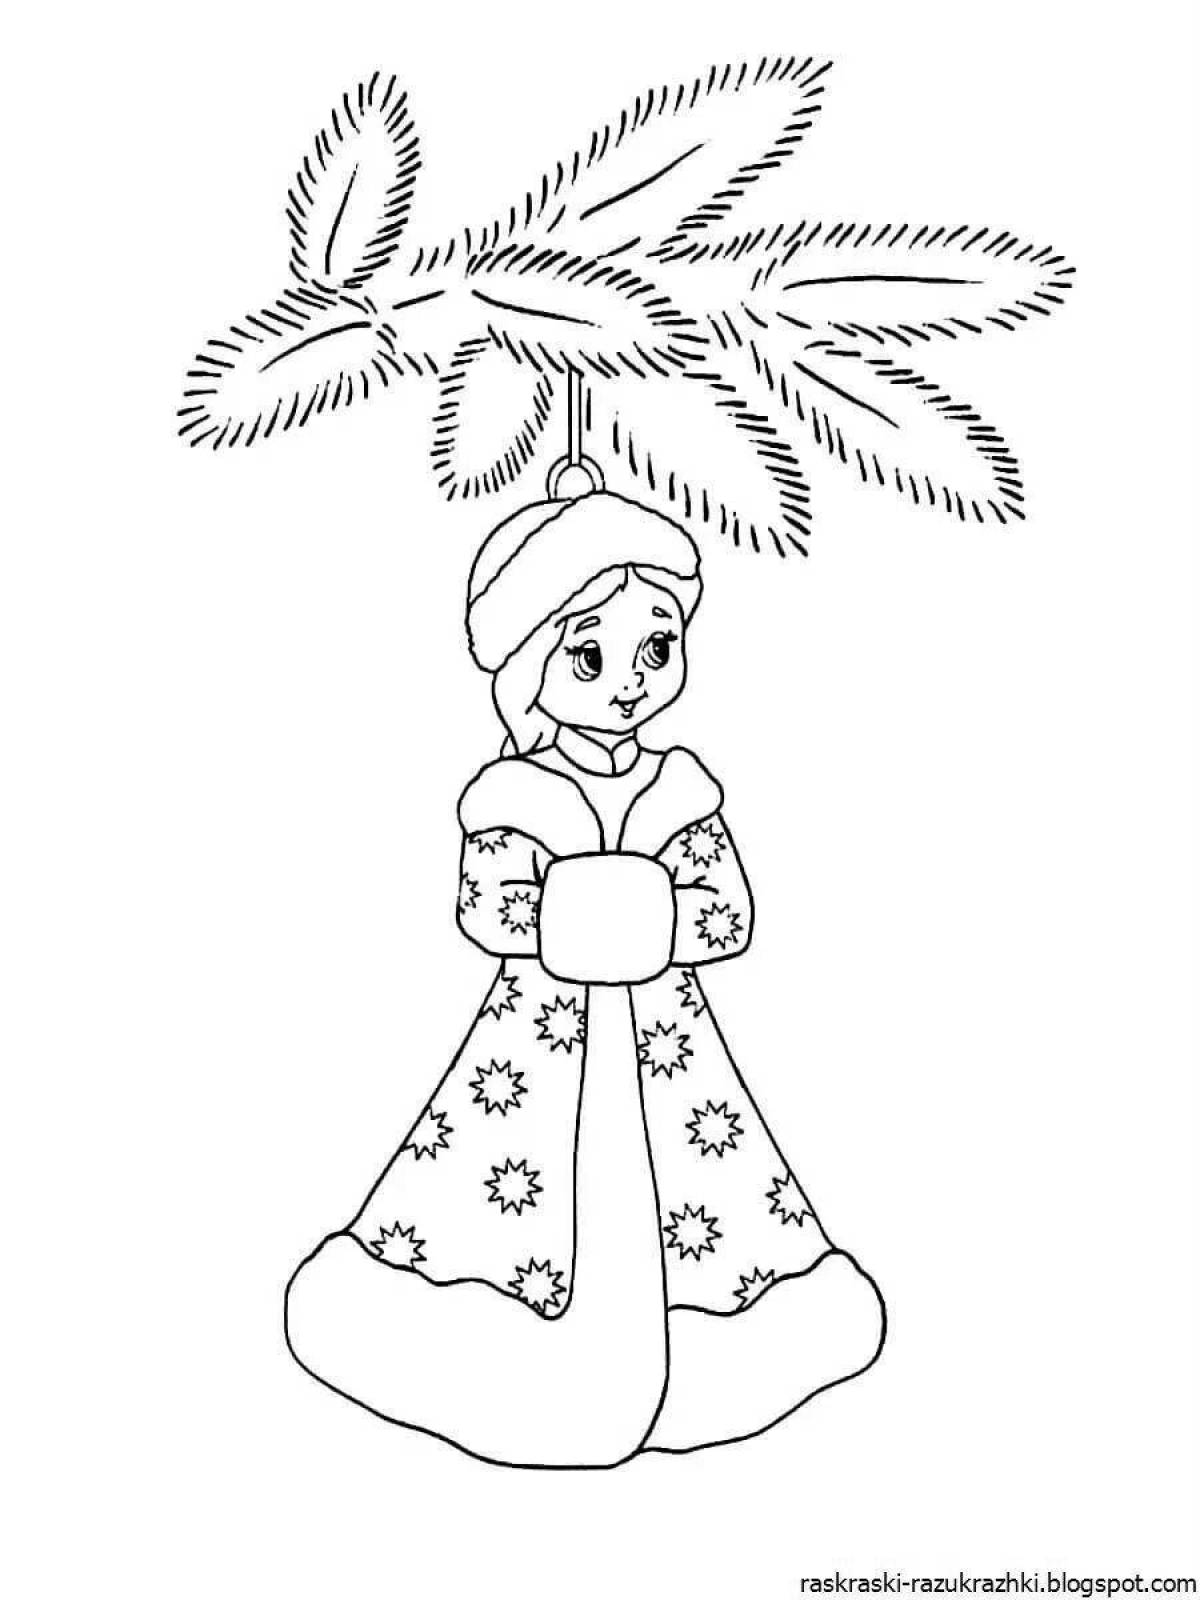 Colorful Snow Maiden coloring book for children